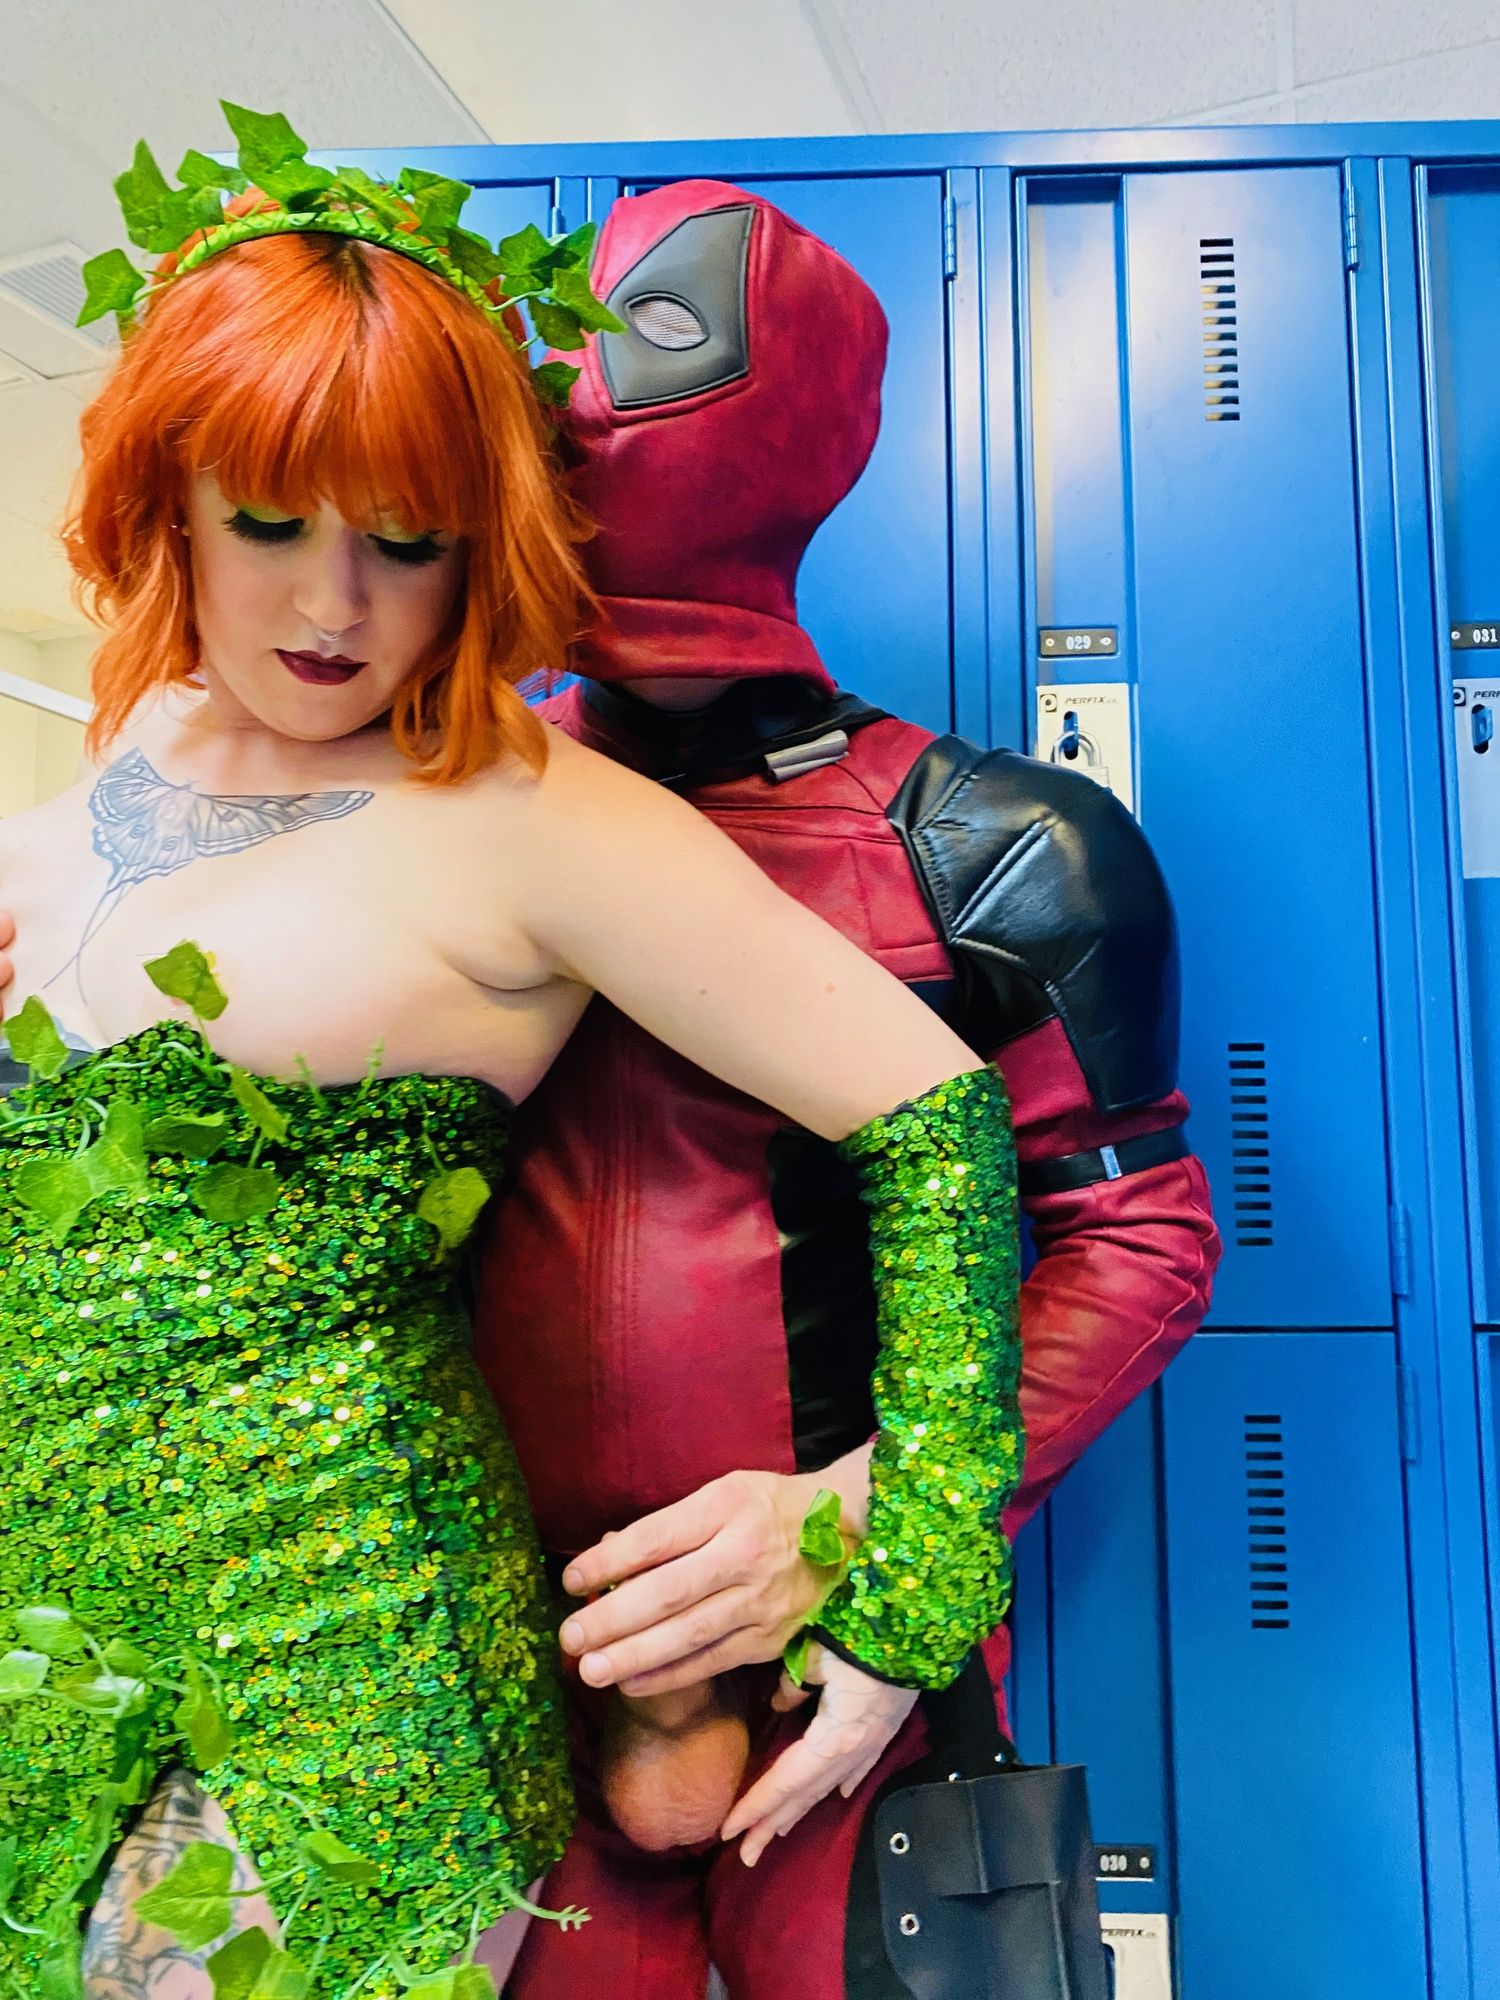 GYM LOCKER ROOM SEX with Poison Ivy & Deadpool (HOT) #16